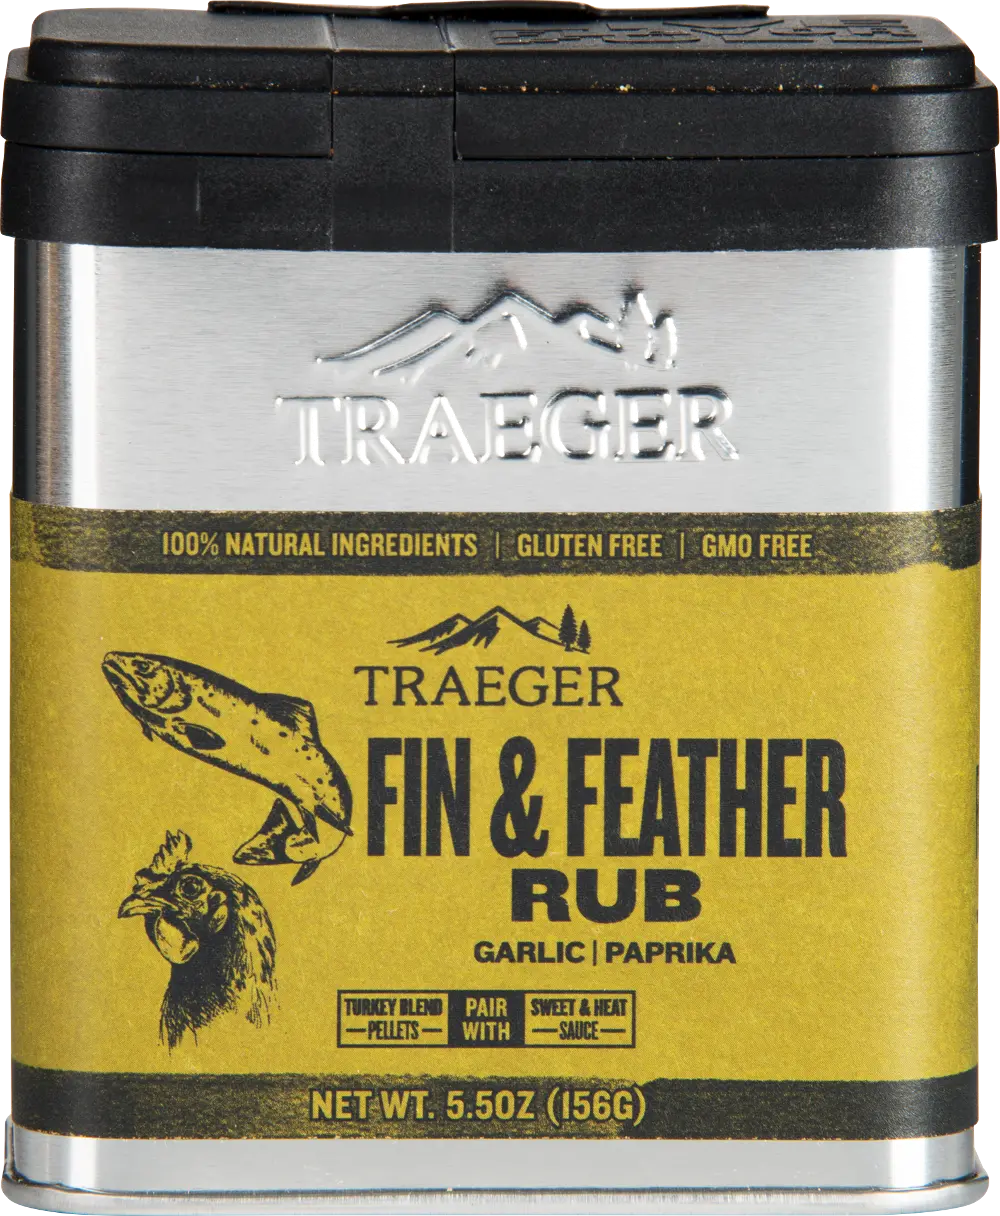 SPC176,FIN&FEATHER Traeger Grill Fin and Feather Rub-1